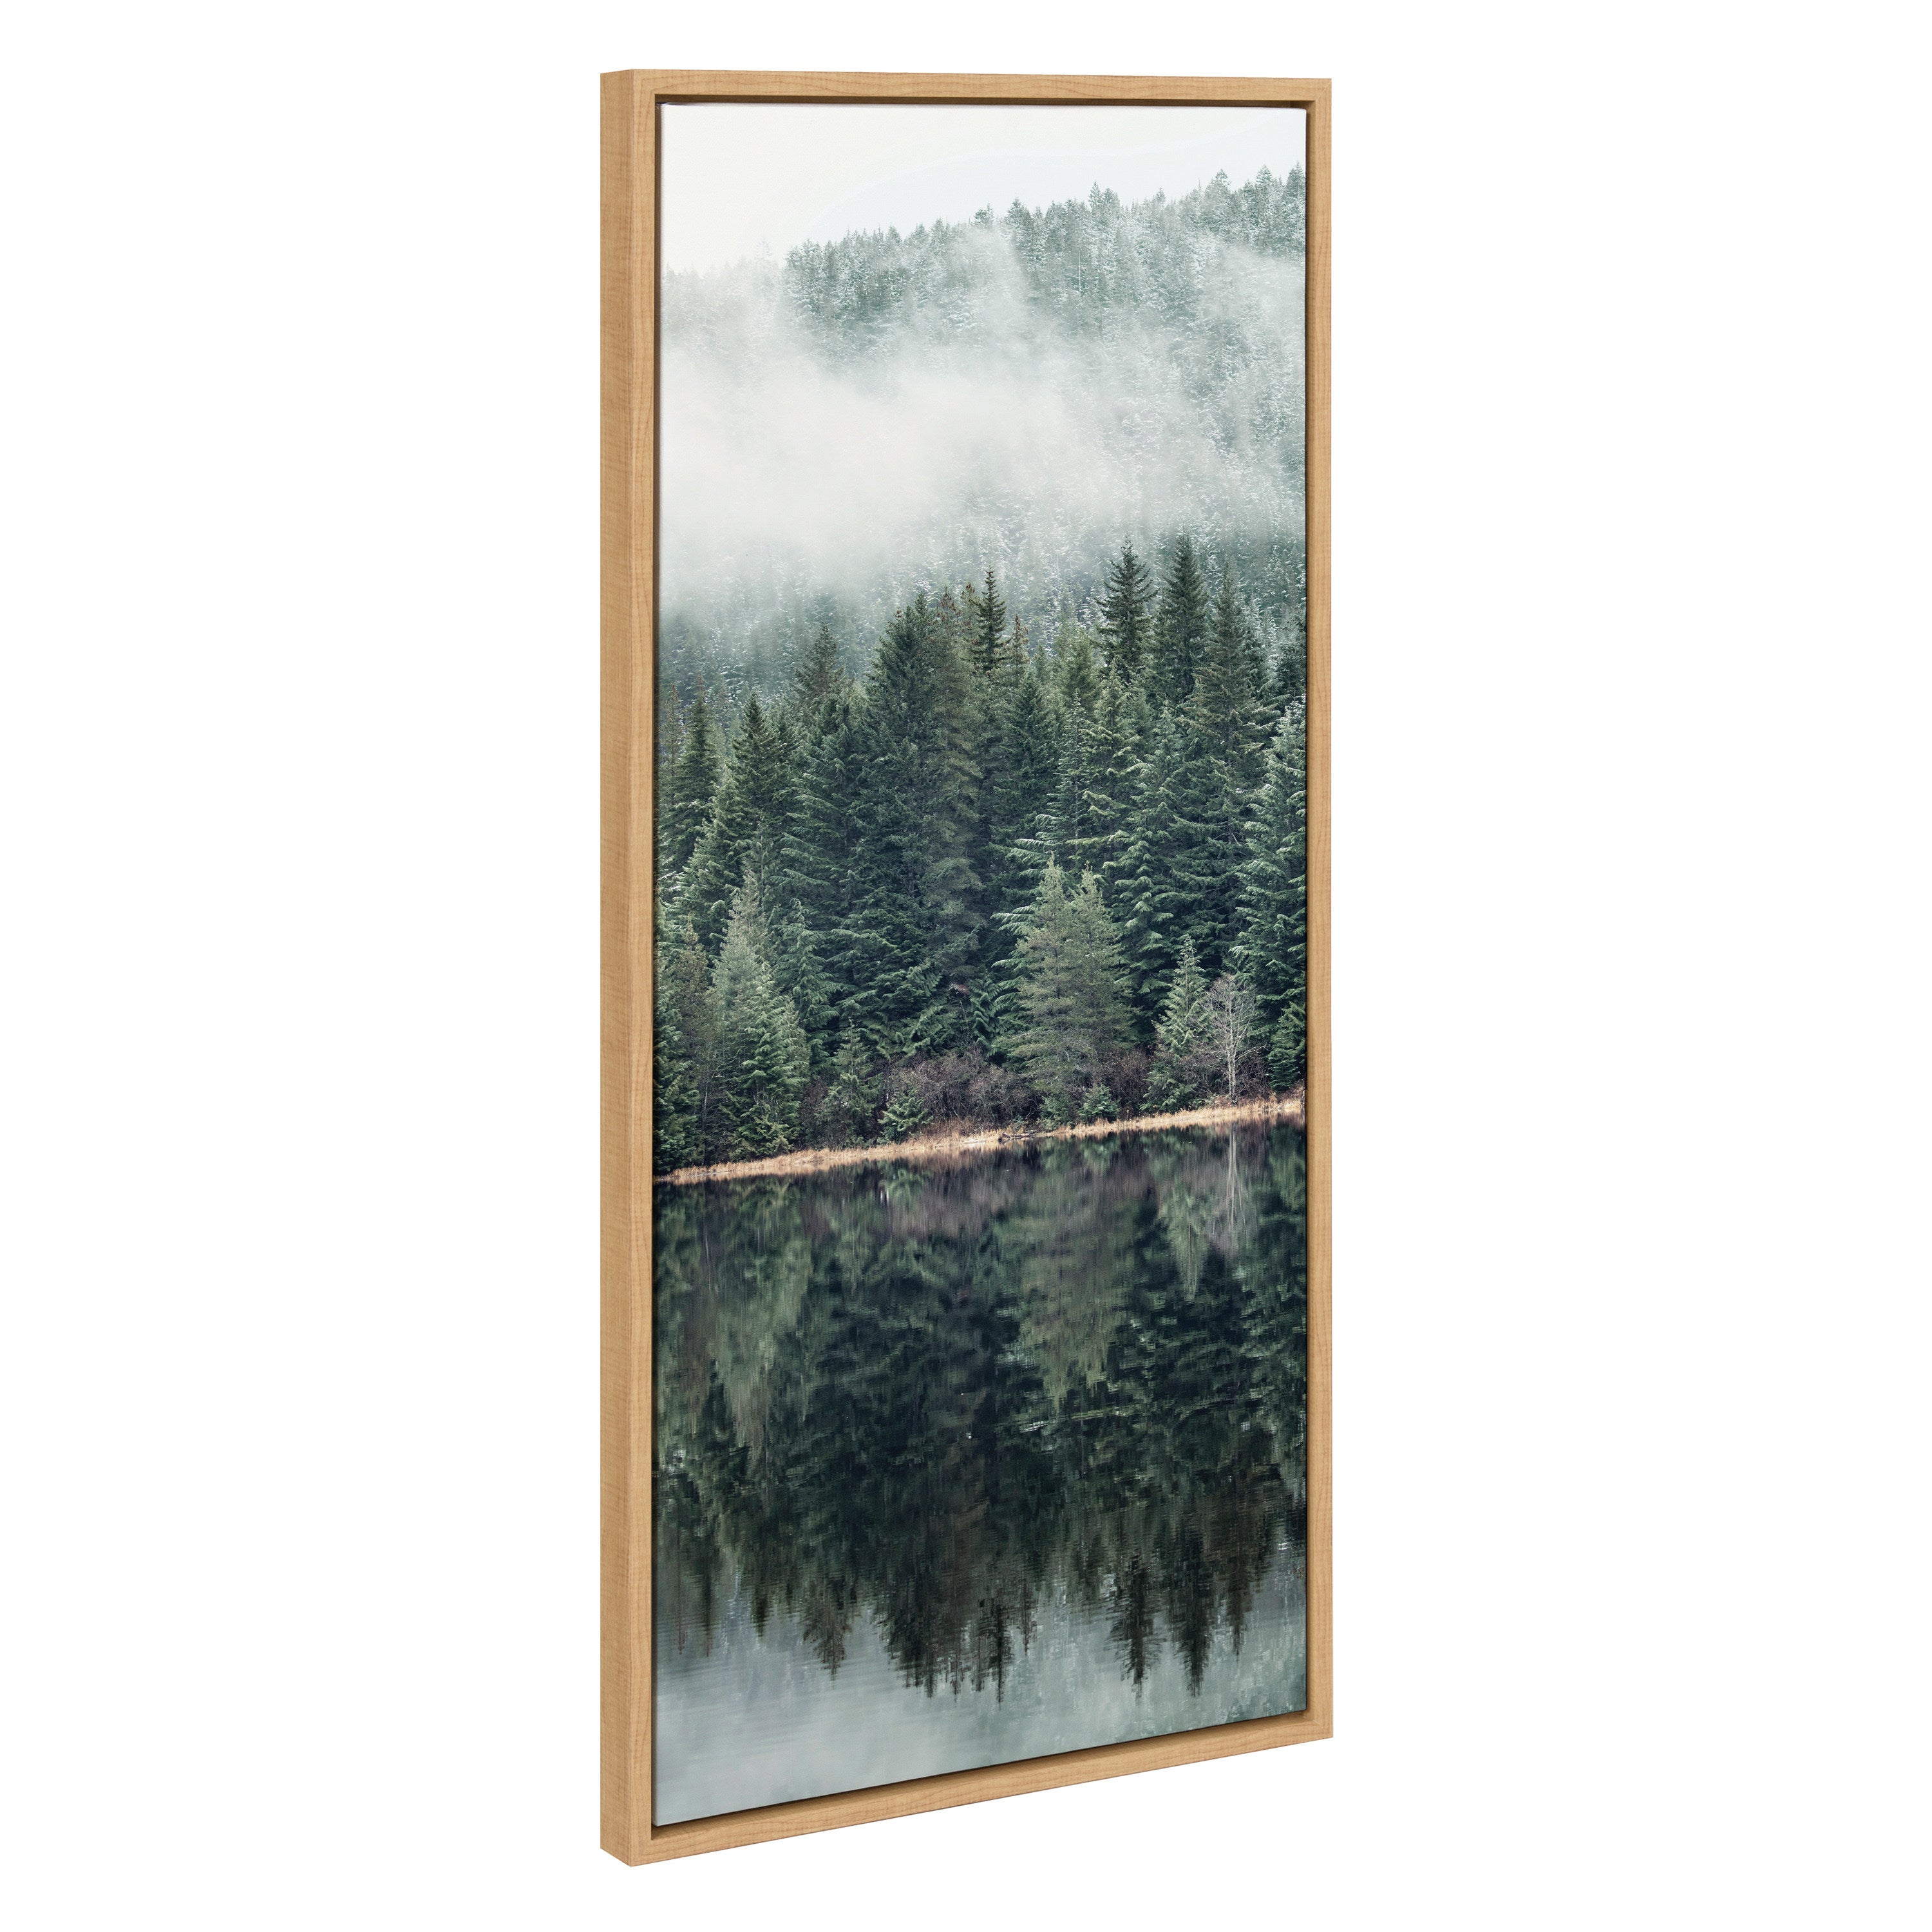 Sylvie Misty Forest Framed Canvas by Emiko and Mark Franzen of F2Images